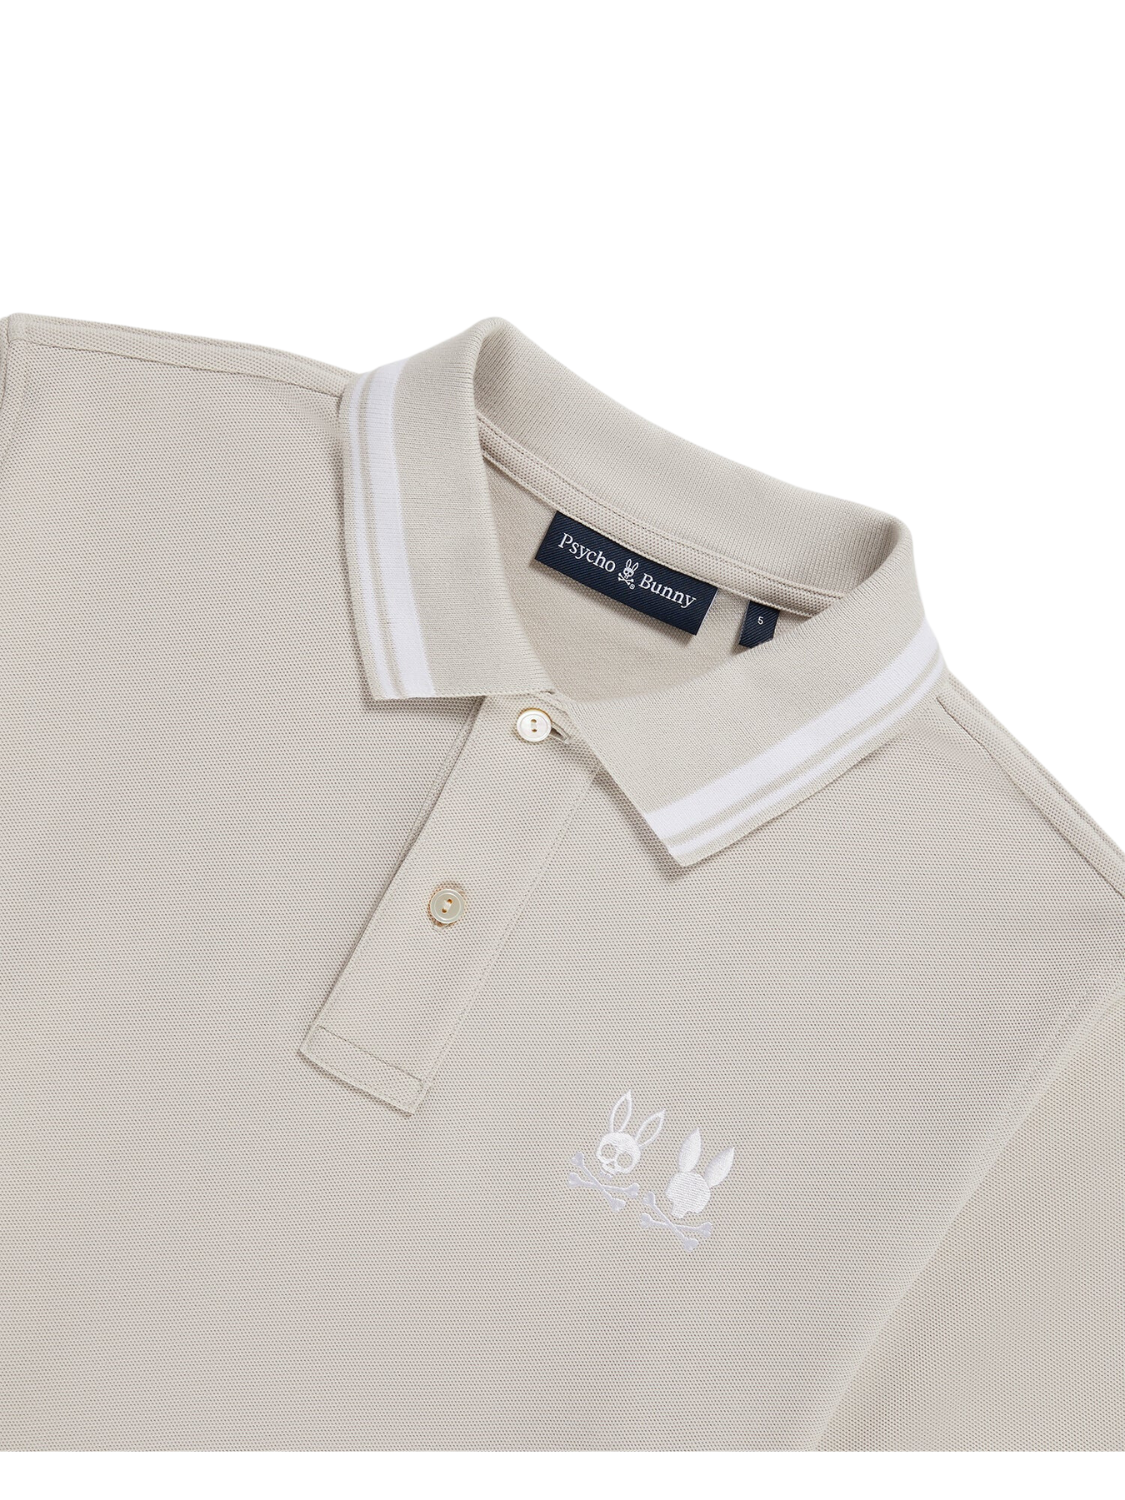 men's Kingwood piqué polo with an embroidered twin Bunny logo on the chest